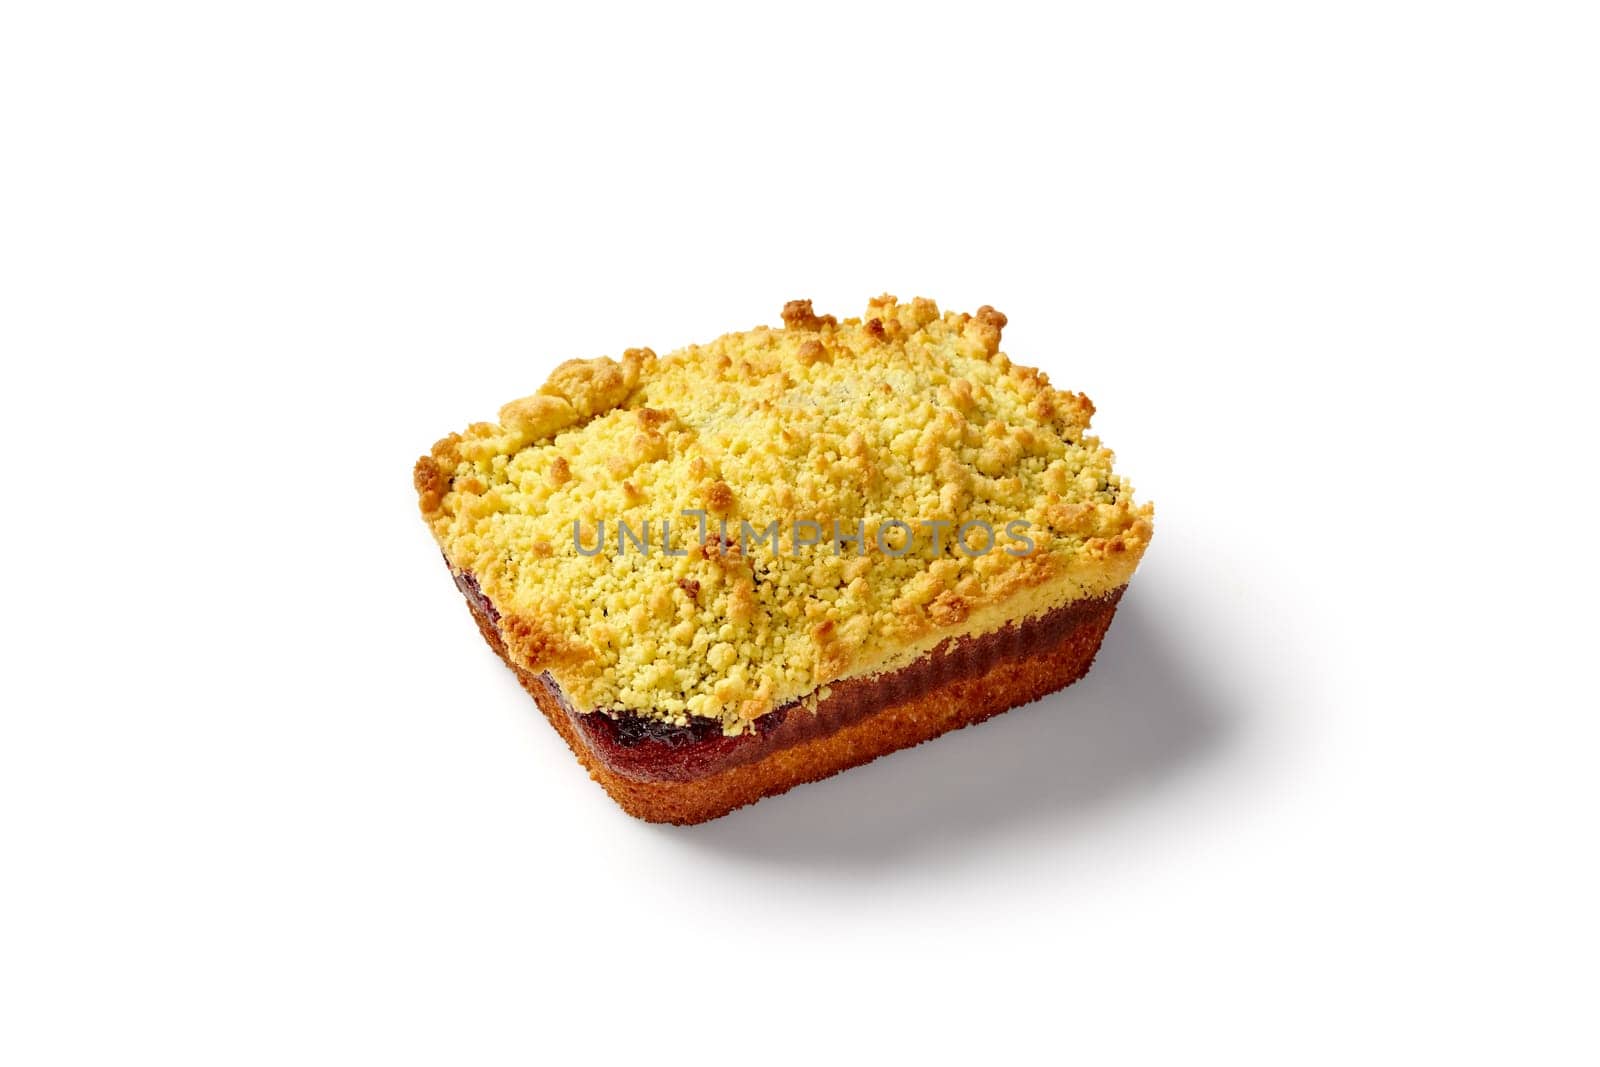 Scrumptious crumble pie with rich golden-brown topping and berry jam filling, presented against white backdrop